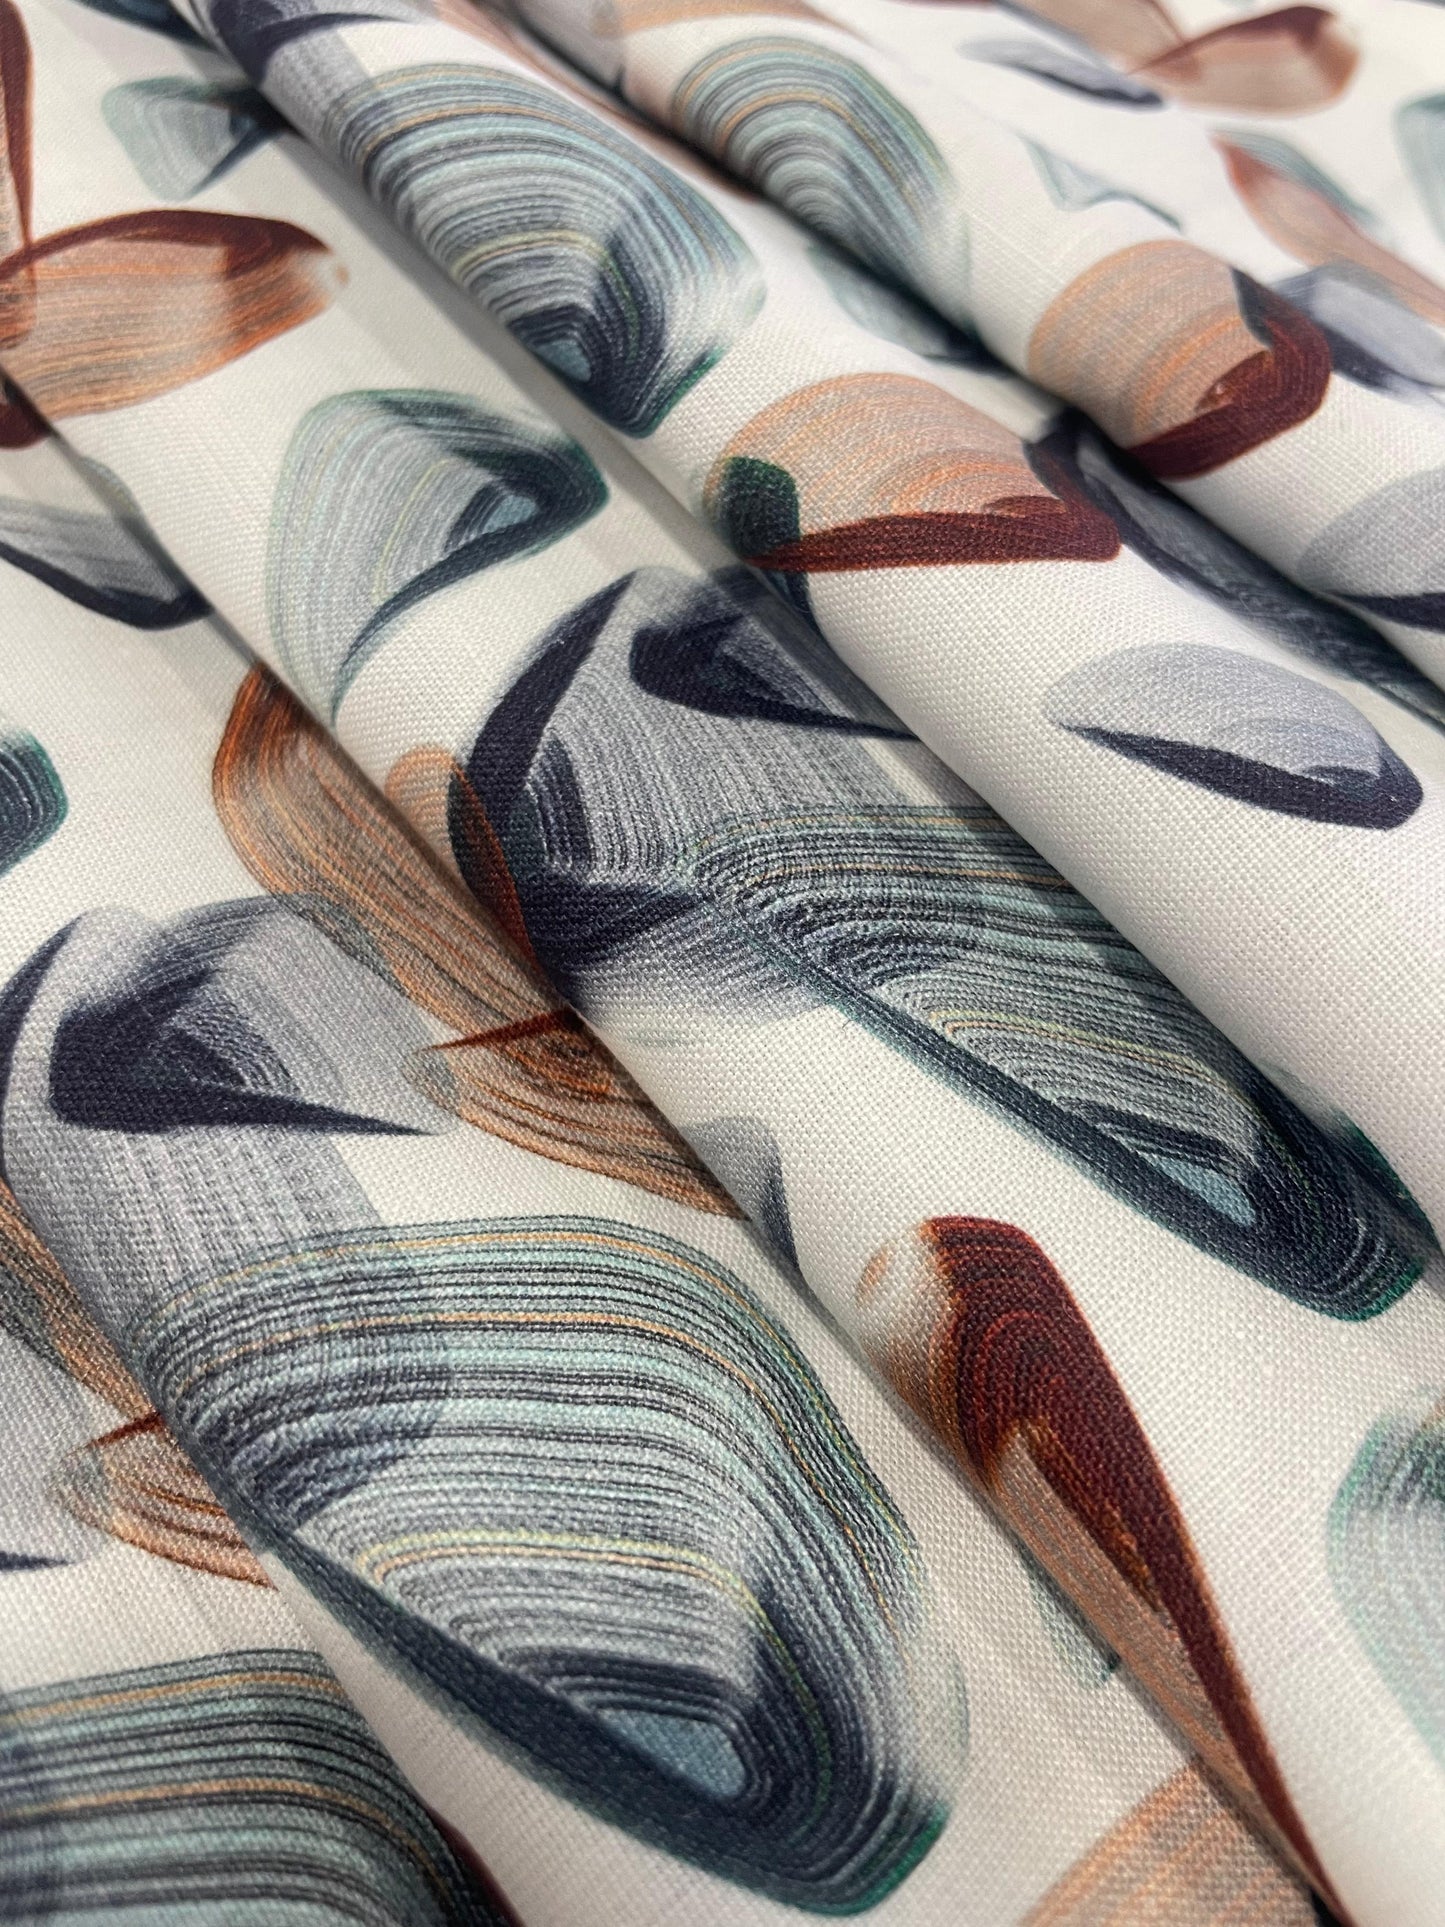 White Dual-Shell Digital Printed - Dyed Premium Linen Fabric BCH-353 (NEW)